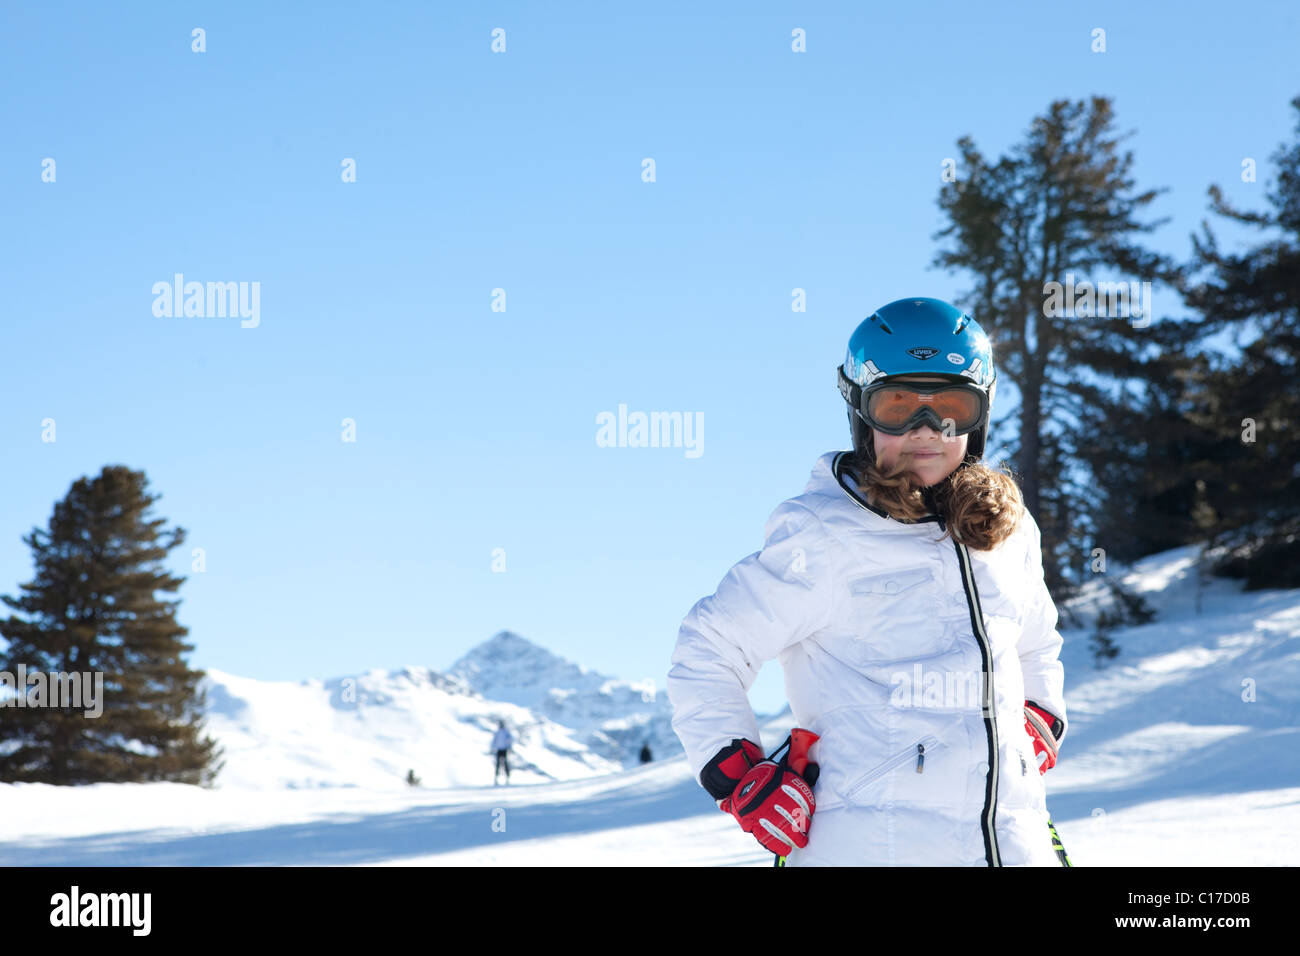 Young skier on the slopes smiling to camera wearing protective helmet and mask Stock Photo